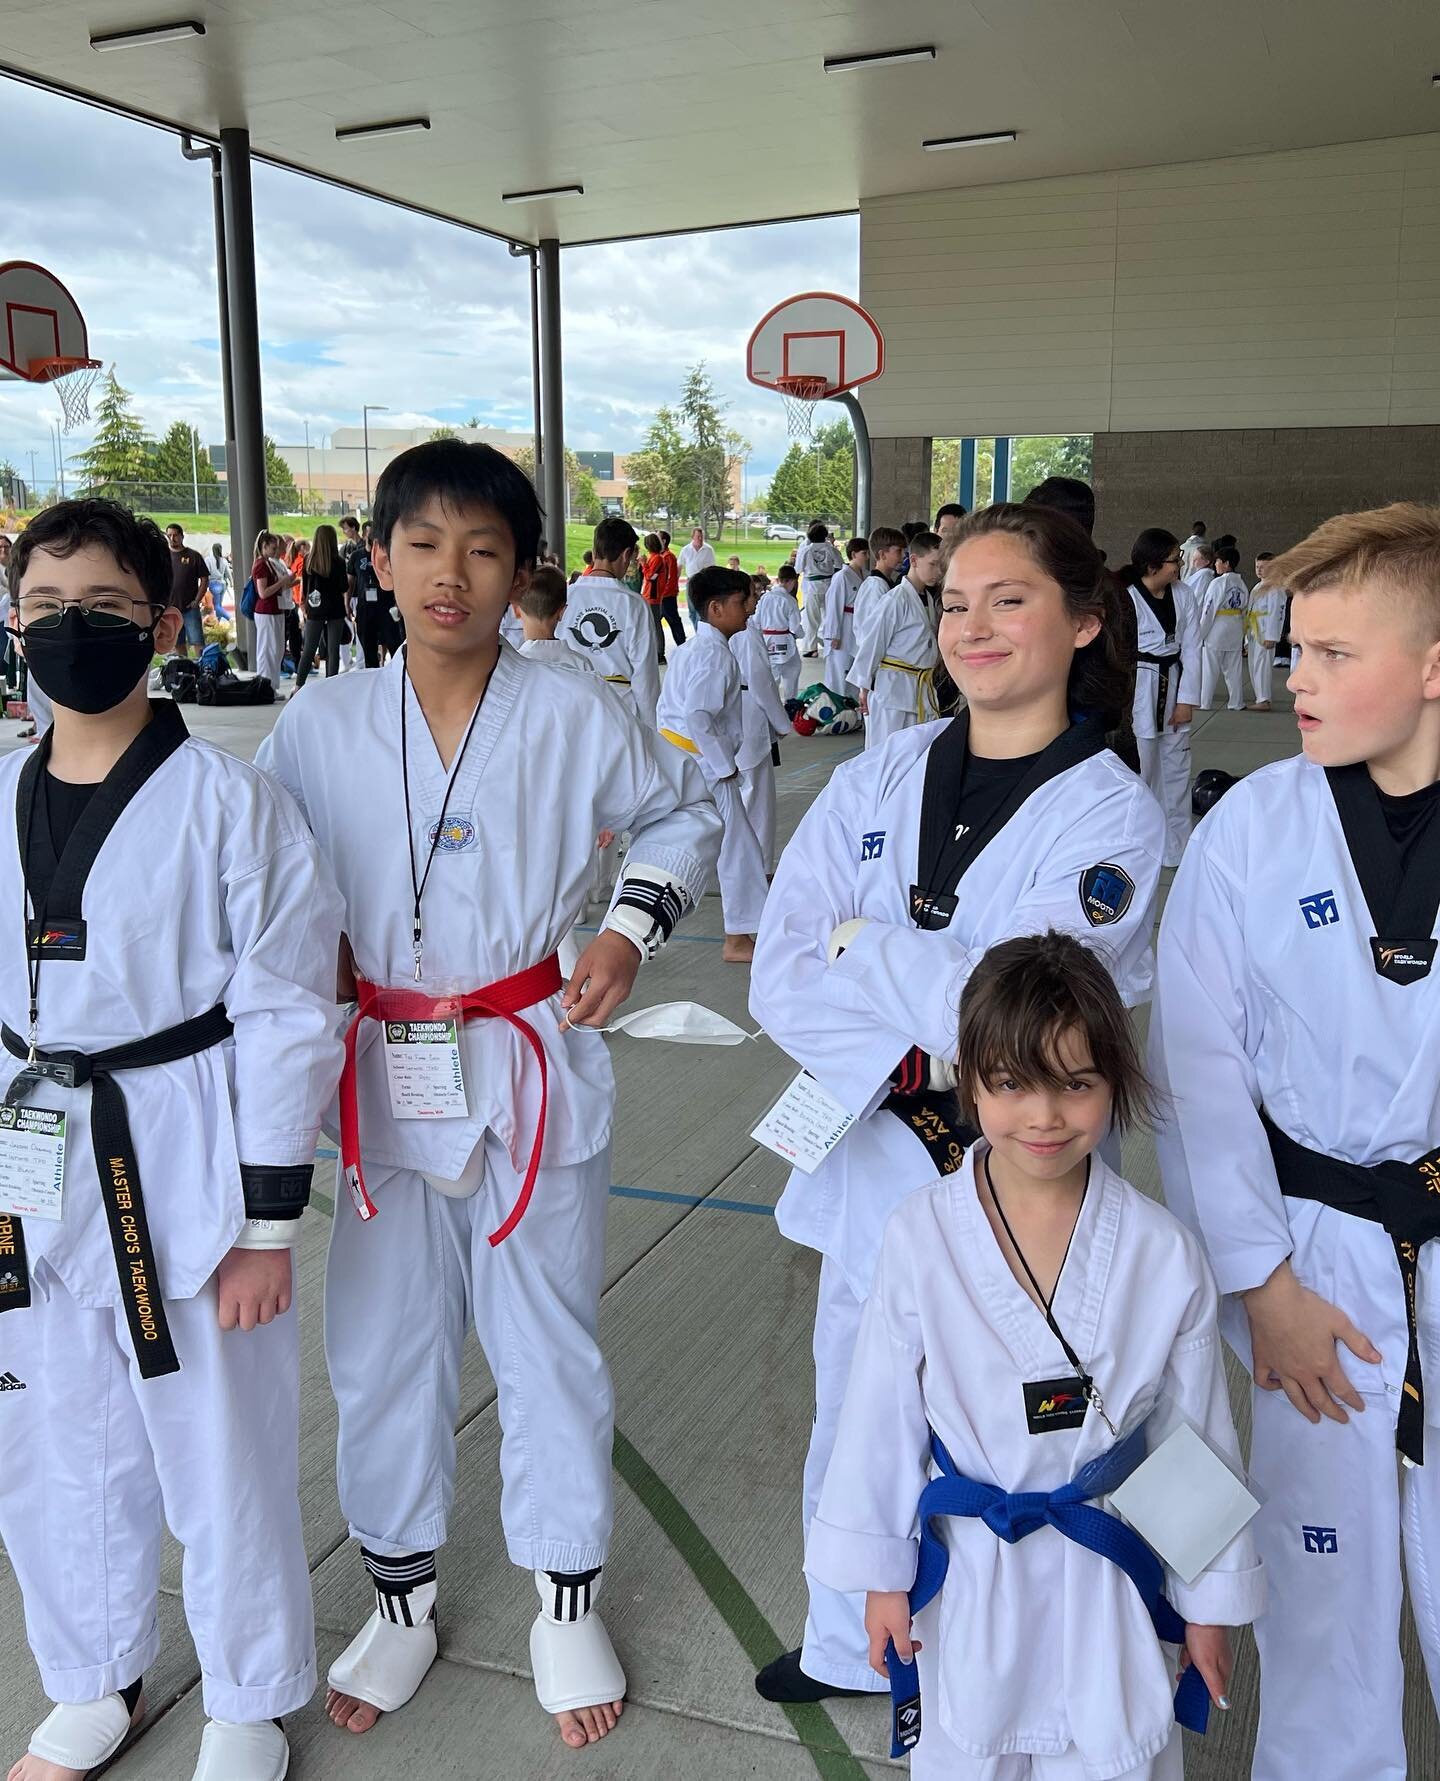 Twins Tigers Taekwondo Championship.
Our athletes did an awesome job in this competition!

Logan Komori 3rd place poomsae 
Jefry Orrillo 1st place World class sparring
Ava Orillo 2nd place World class sparring
Morgan Kulawiak 1st place sparring
Henry